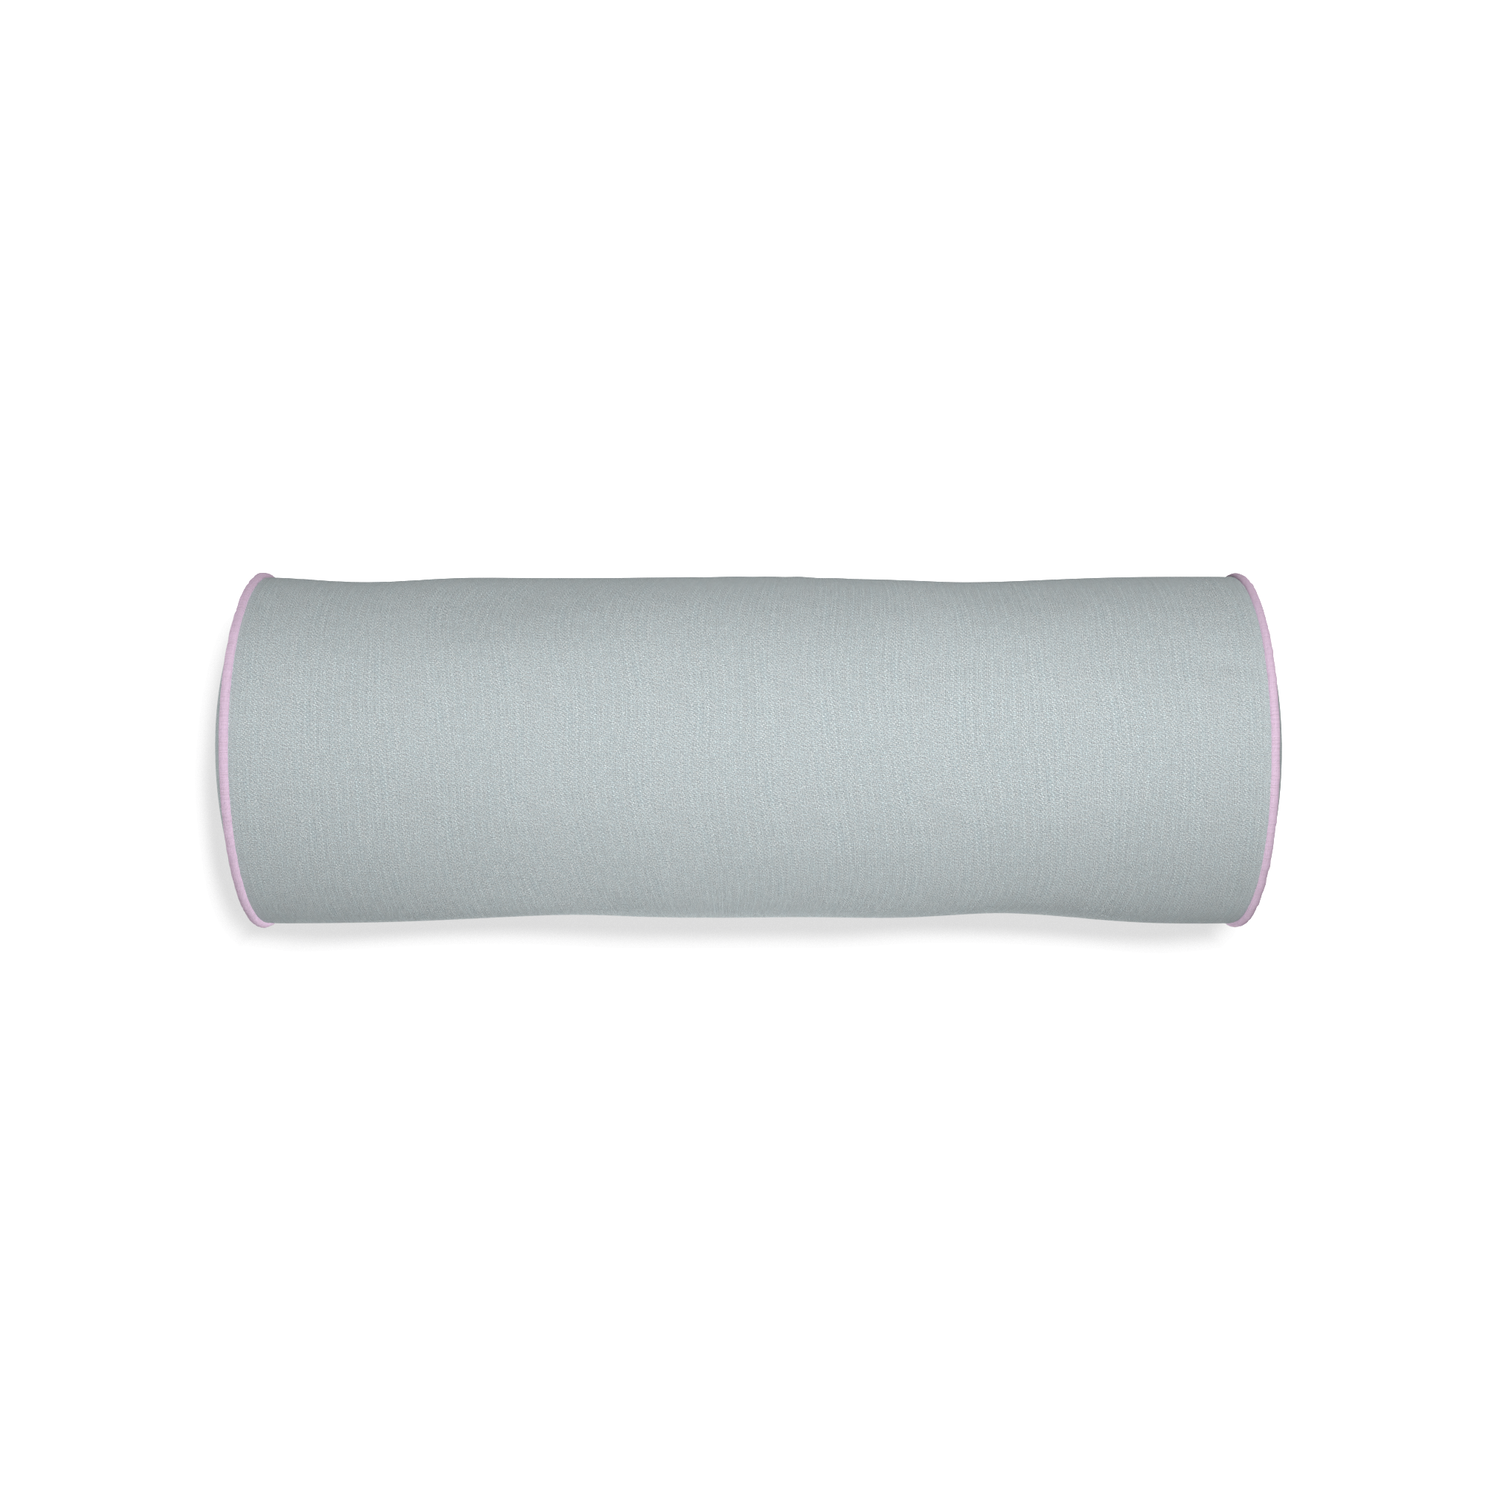 Bolster sea custom grey bluepillow with l piping on white background